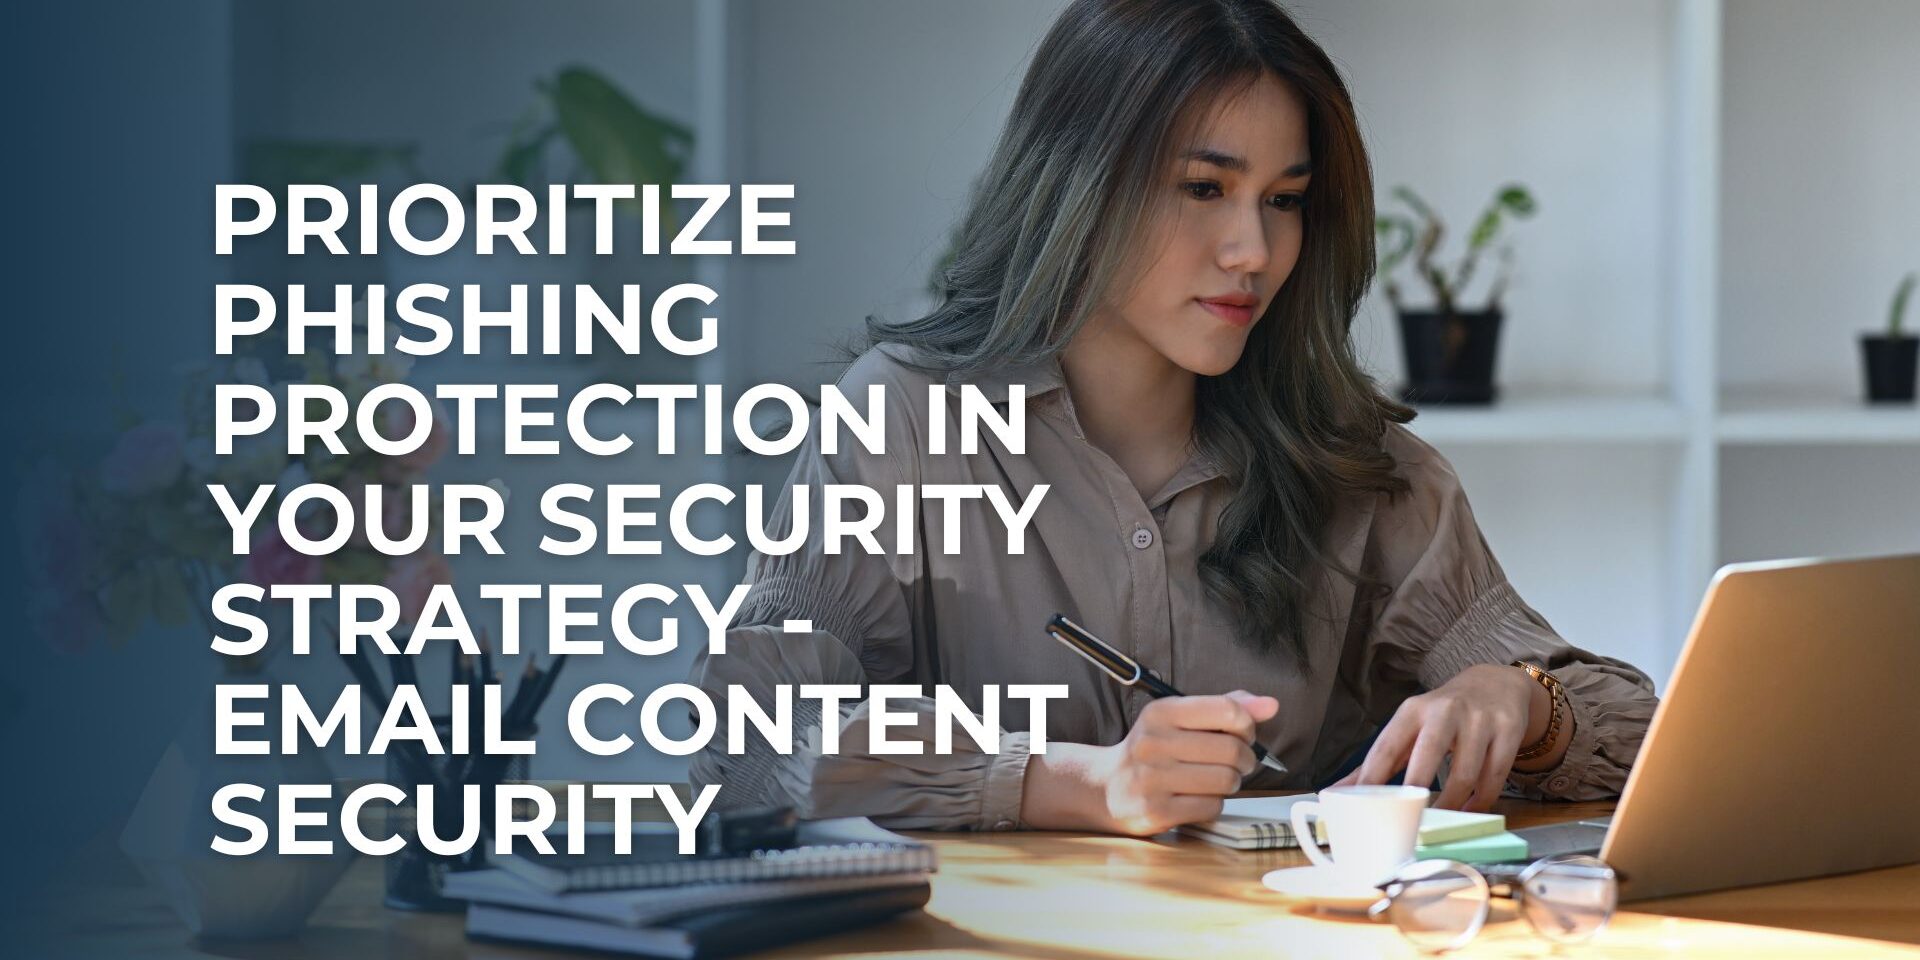 Prioritize Phishing Protection and Email Content Security in Your Security Strategy